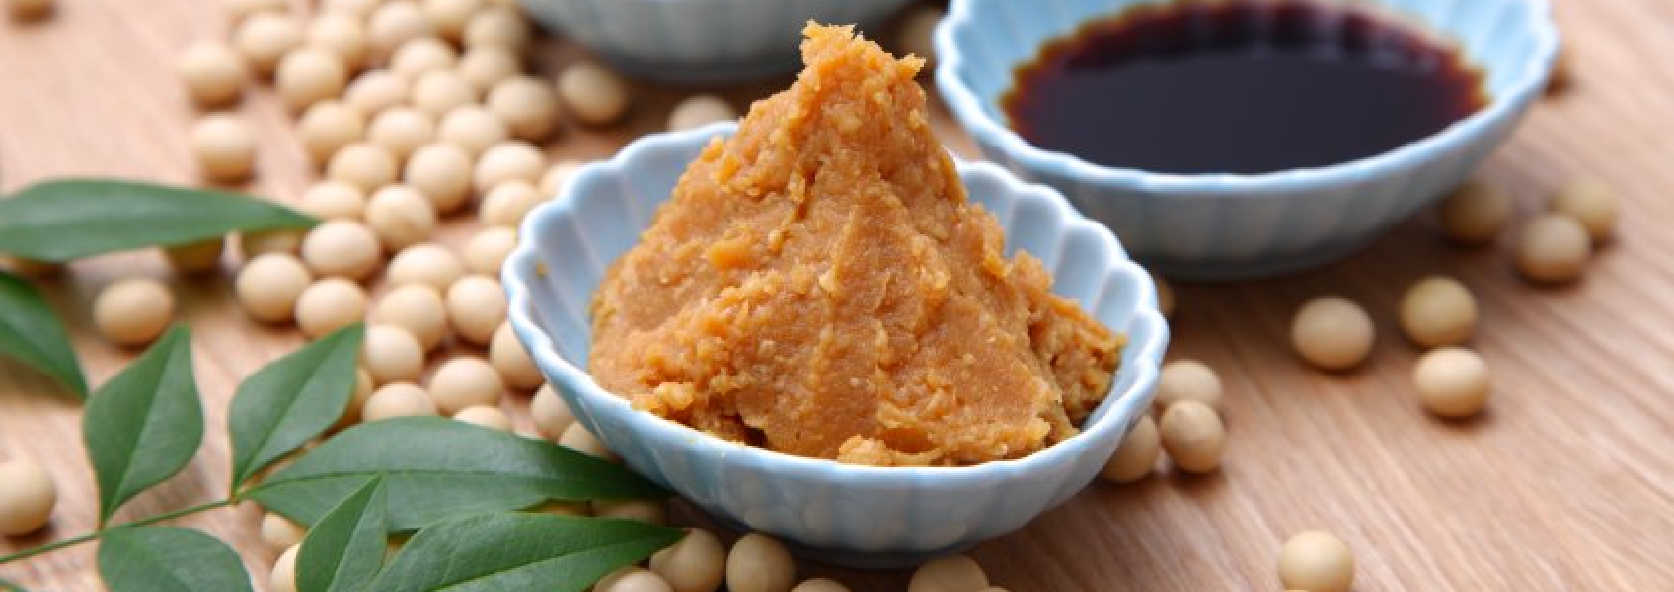 What is Miso Japanese Soybean Paste?